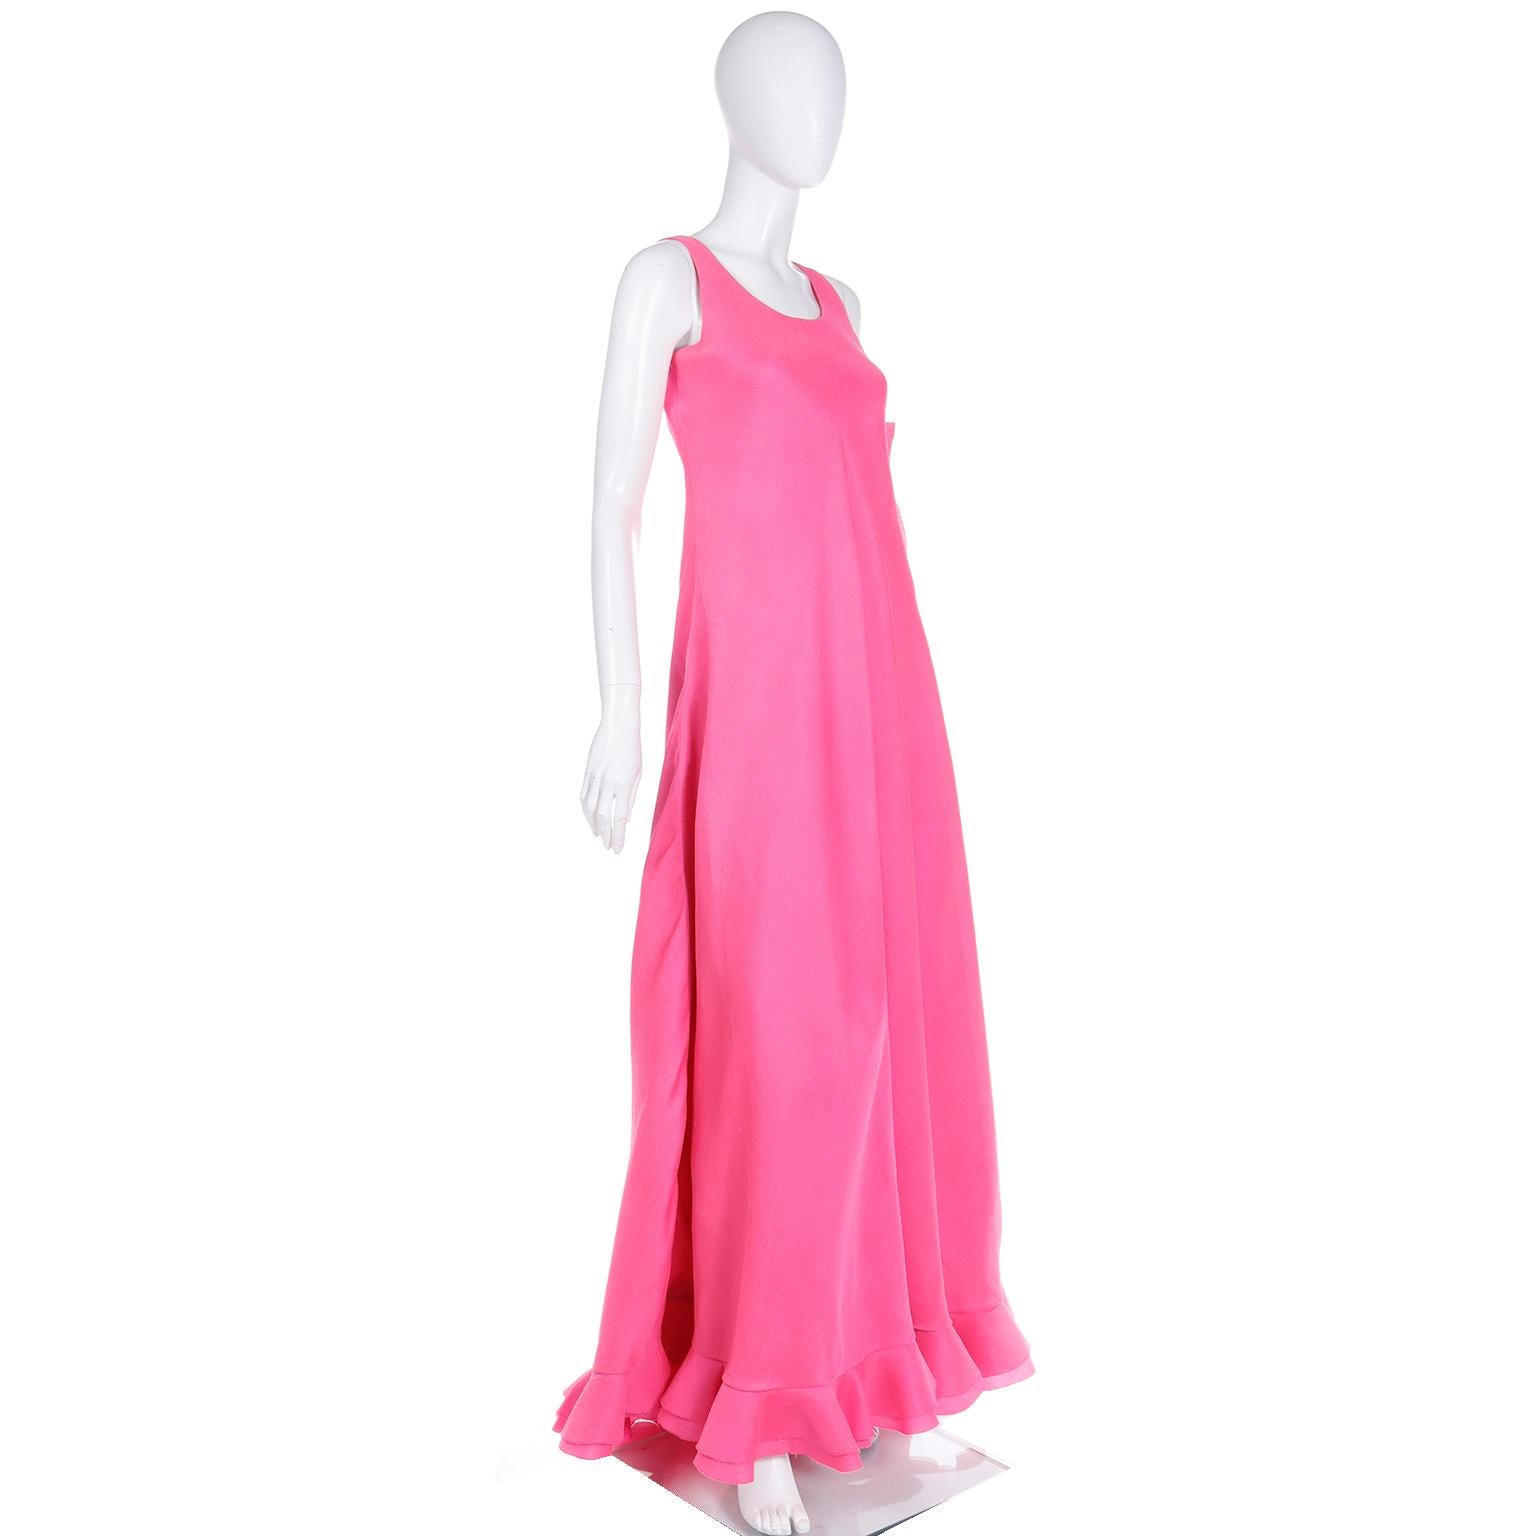 1971 Christian Dior Haute Couture Pink Ruffled Runway Evening Dress Grace Kelly  5